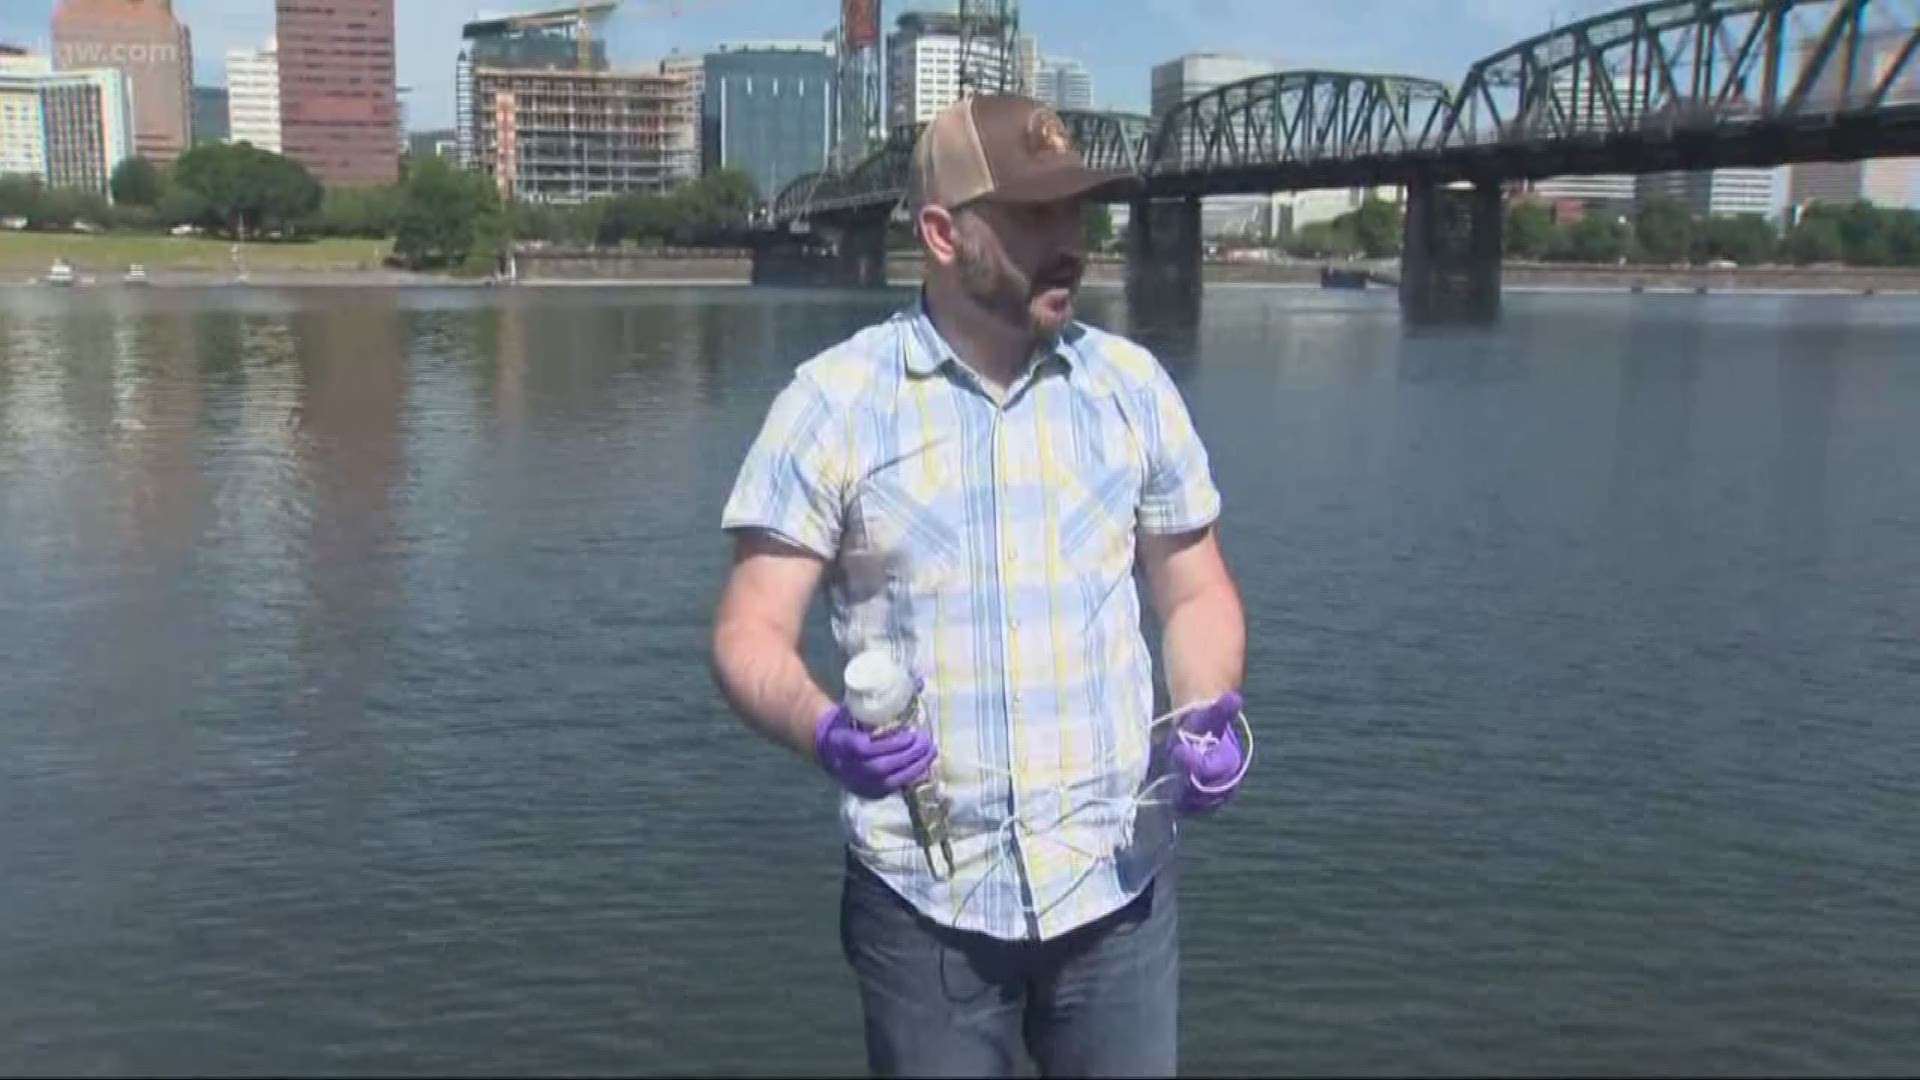 The city of Portland has started pulling samples from the Willamette River and testing for harmful bacteria.